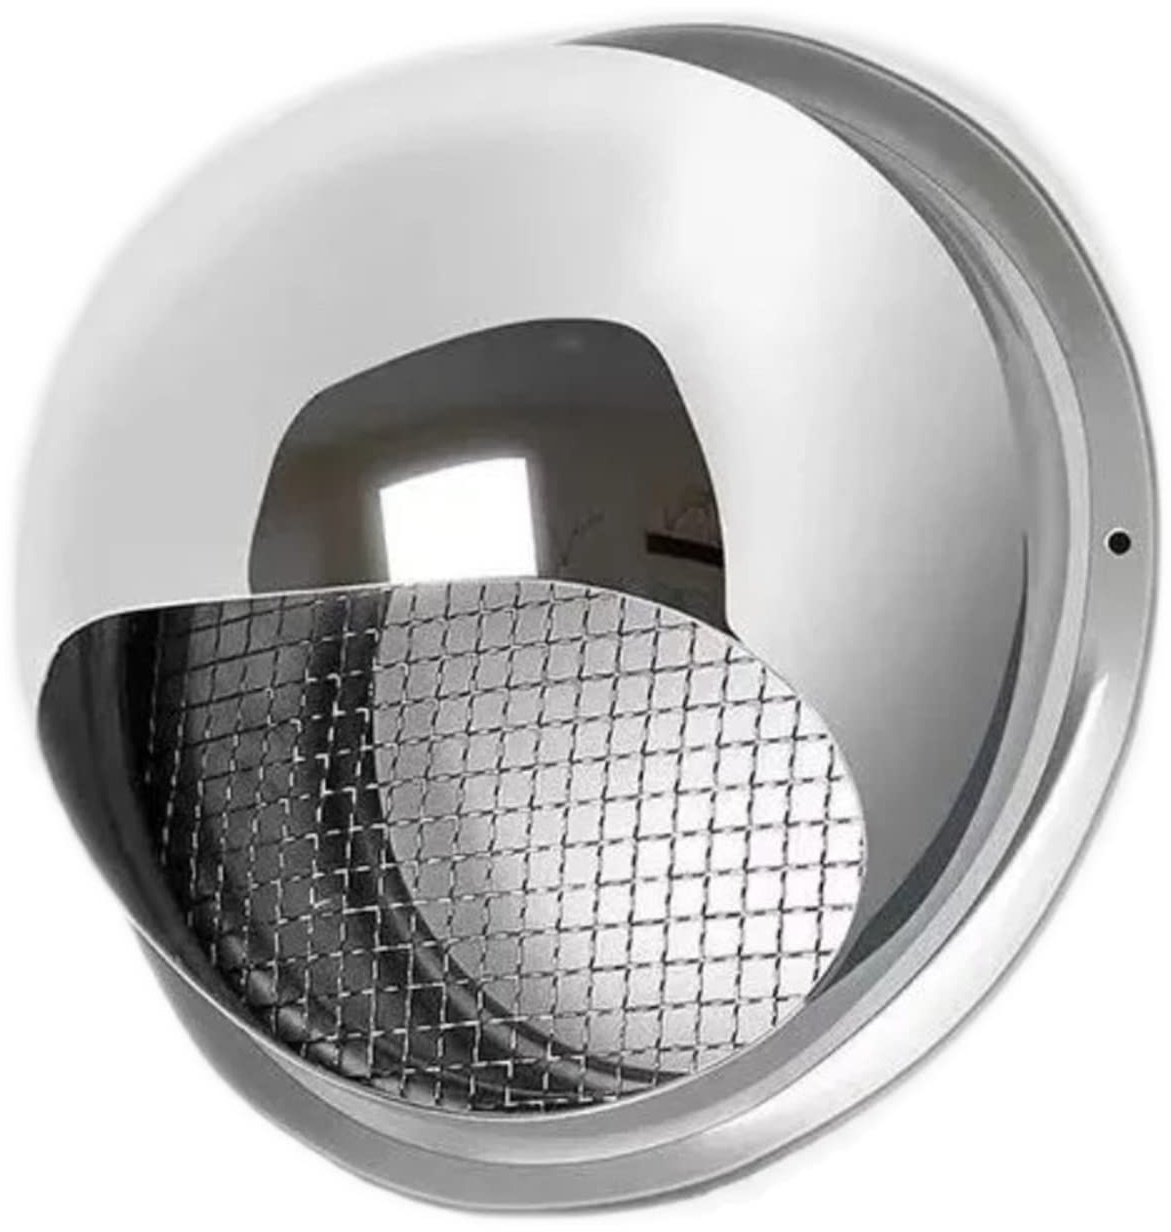 Zanotva Stainless Steel Wall Round Vent Hole Ventilating Cowl,Air Vent Round Cowl,Air Ventilation and Exhaust Wall Vent Outlet Hood,for Bathroom Office Kitchen Ventilation,160mm/6.3in